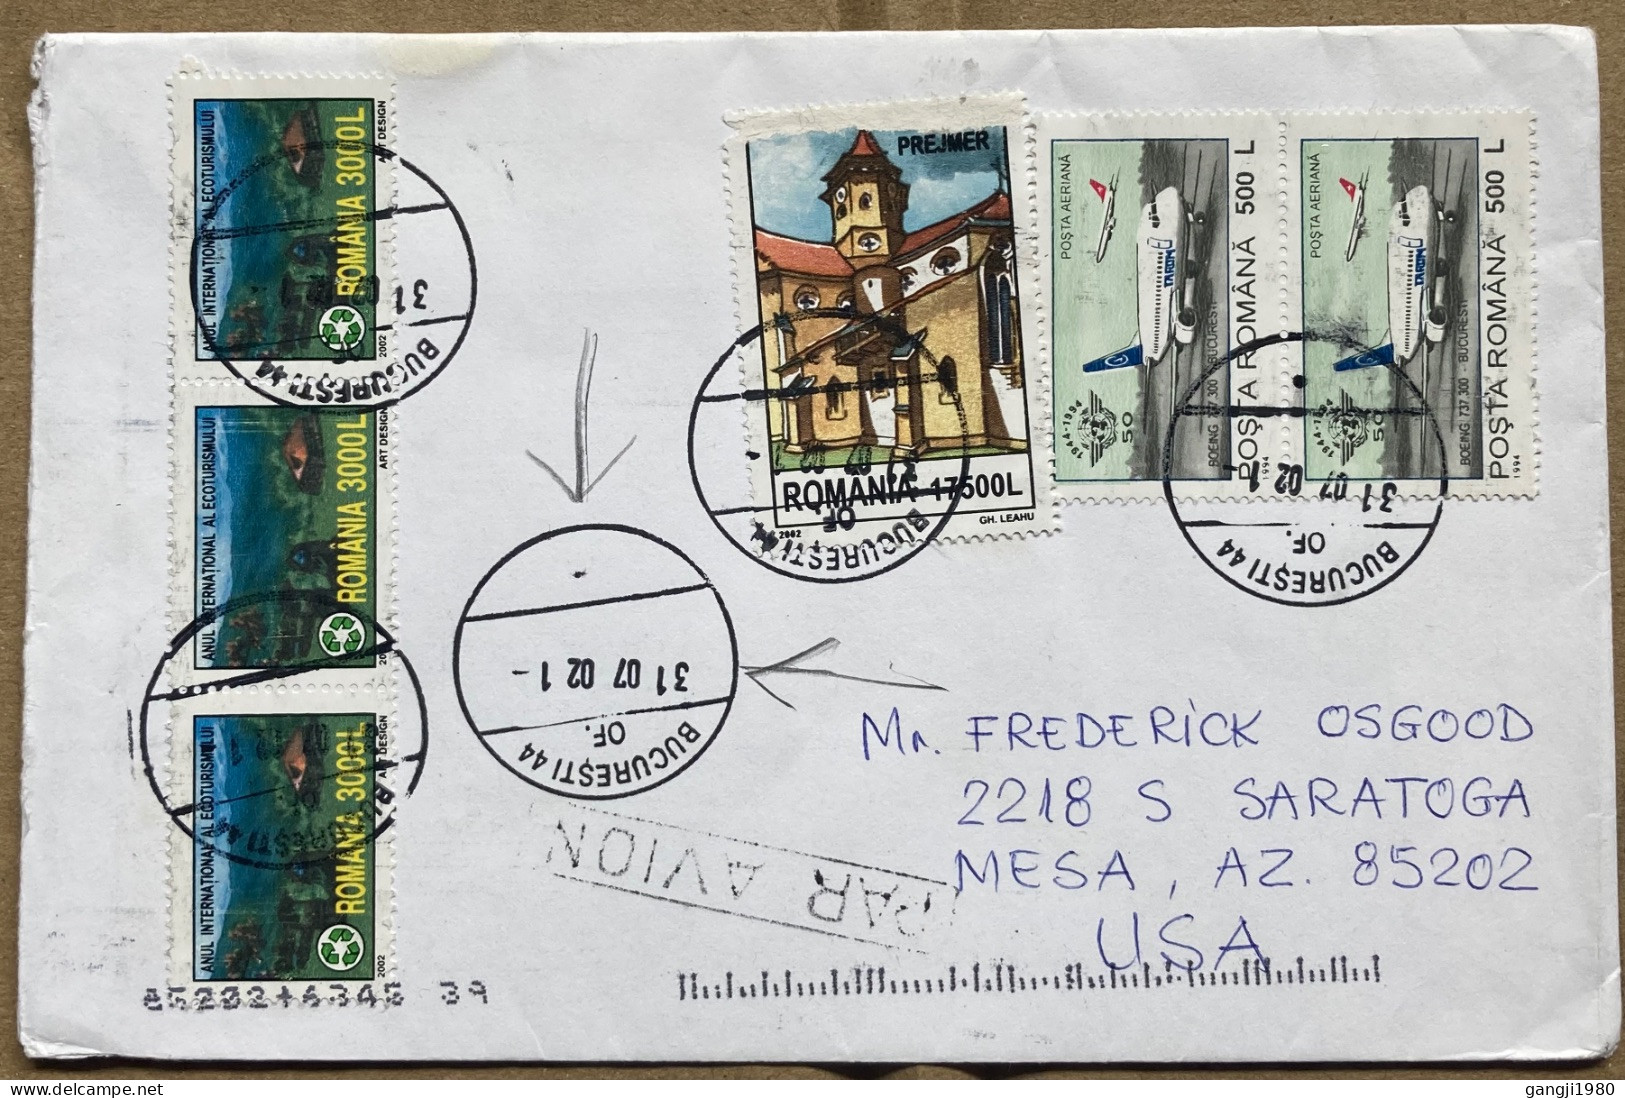 ROMANIA 2002, COVER USED TO USA, 6 STAMP, ECO-TOURISM, PREJMER BUILDING, HERITAGE, BOEING AEROPLANE, BUCHAREST CITY CANC - Brieven En Documenten